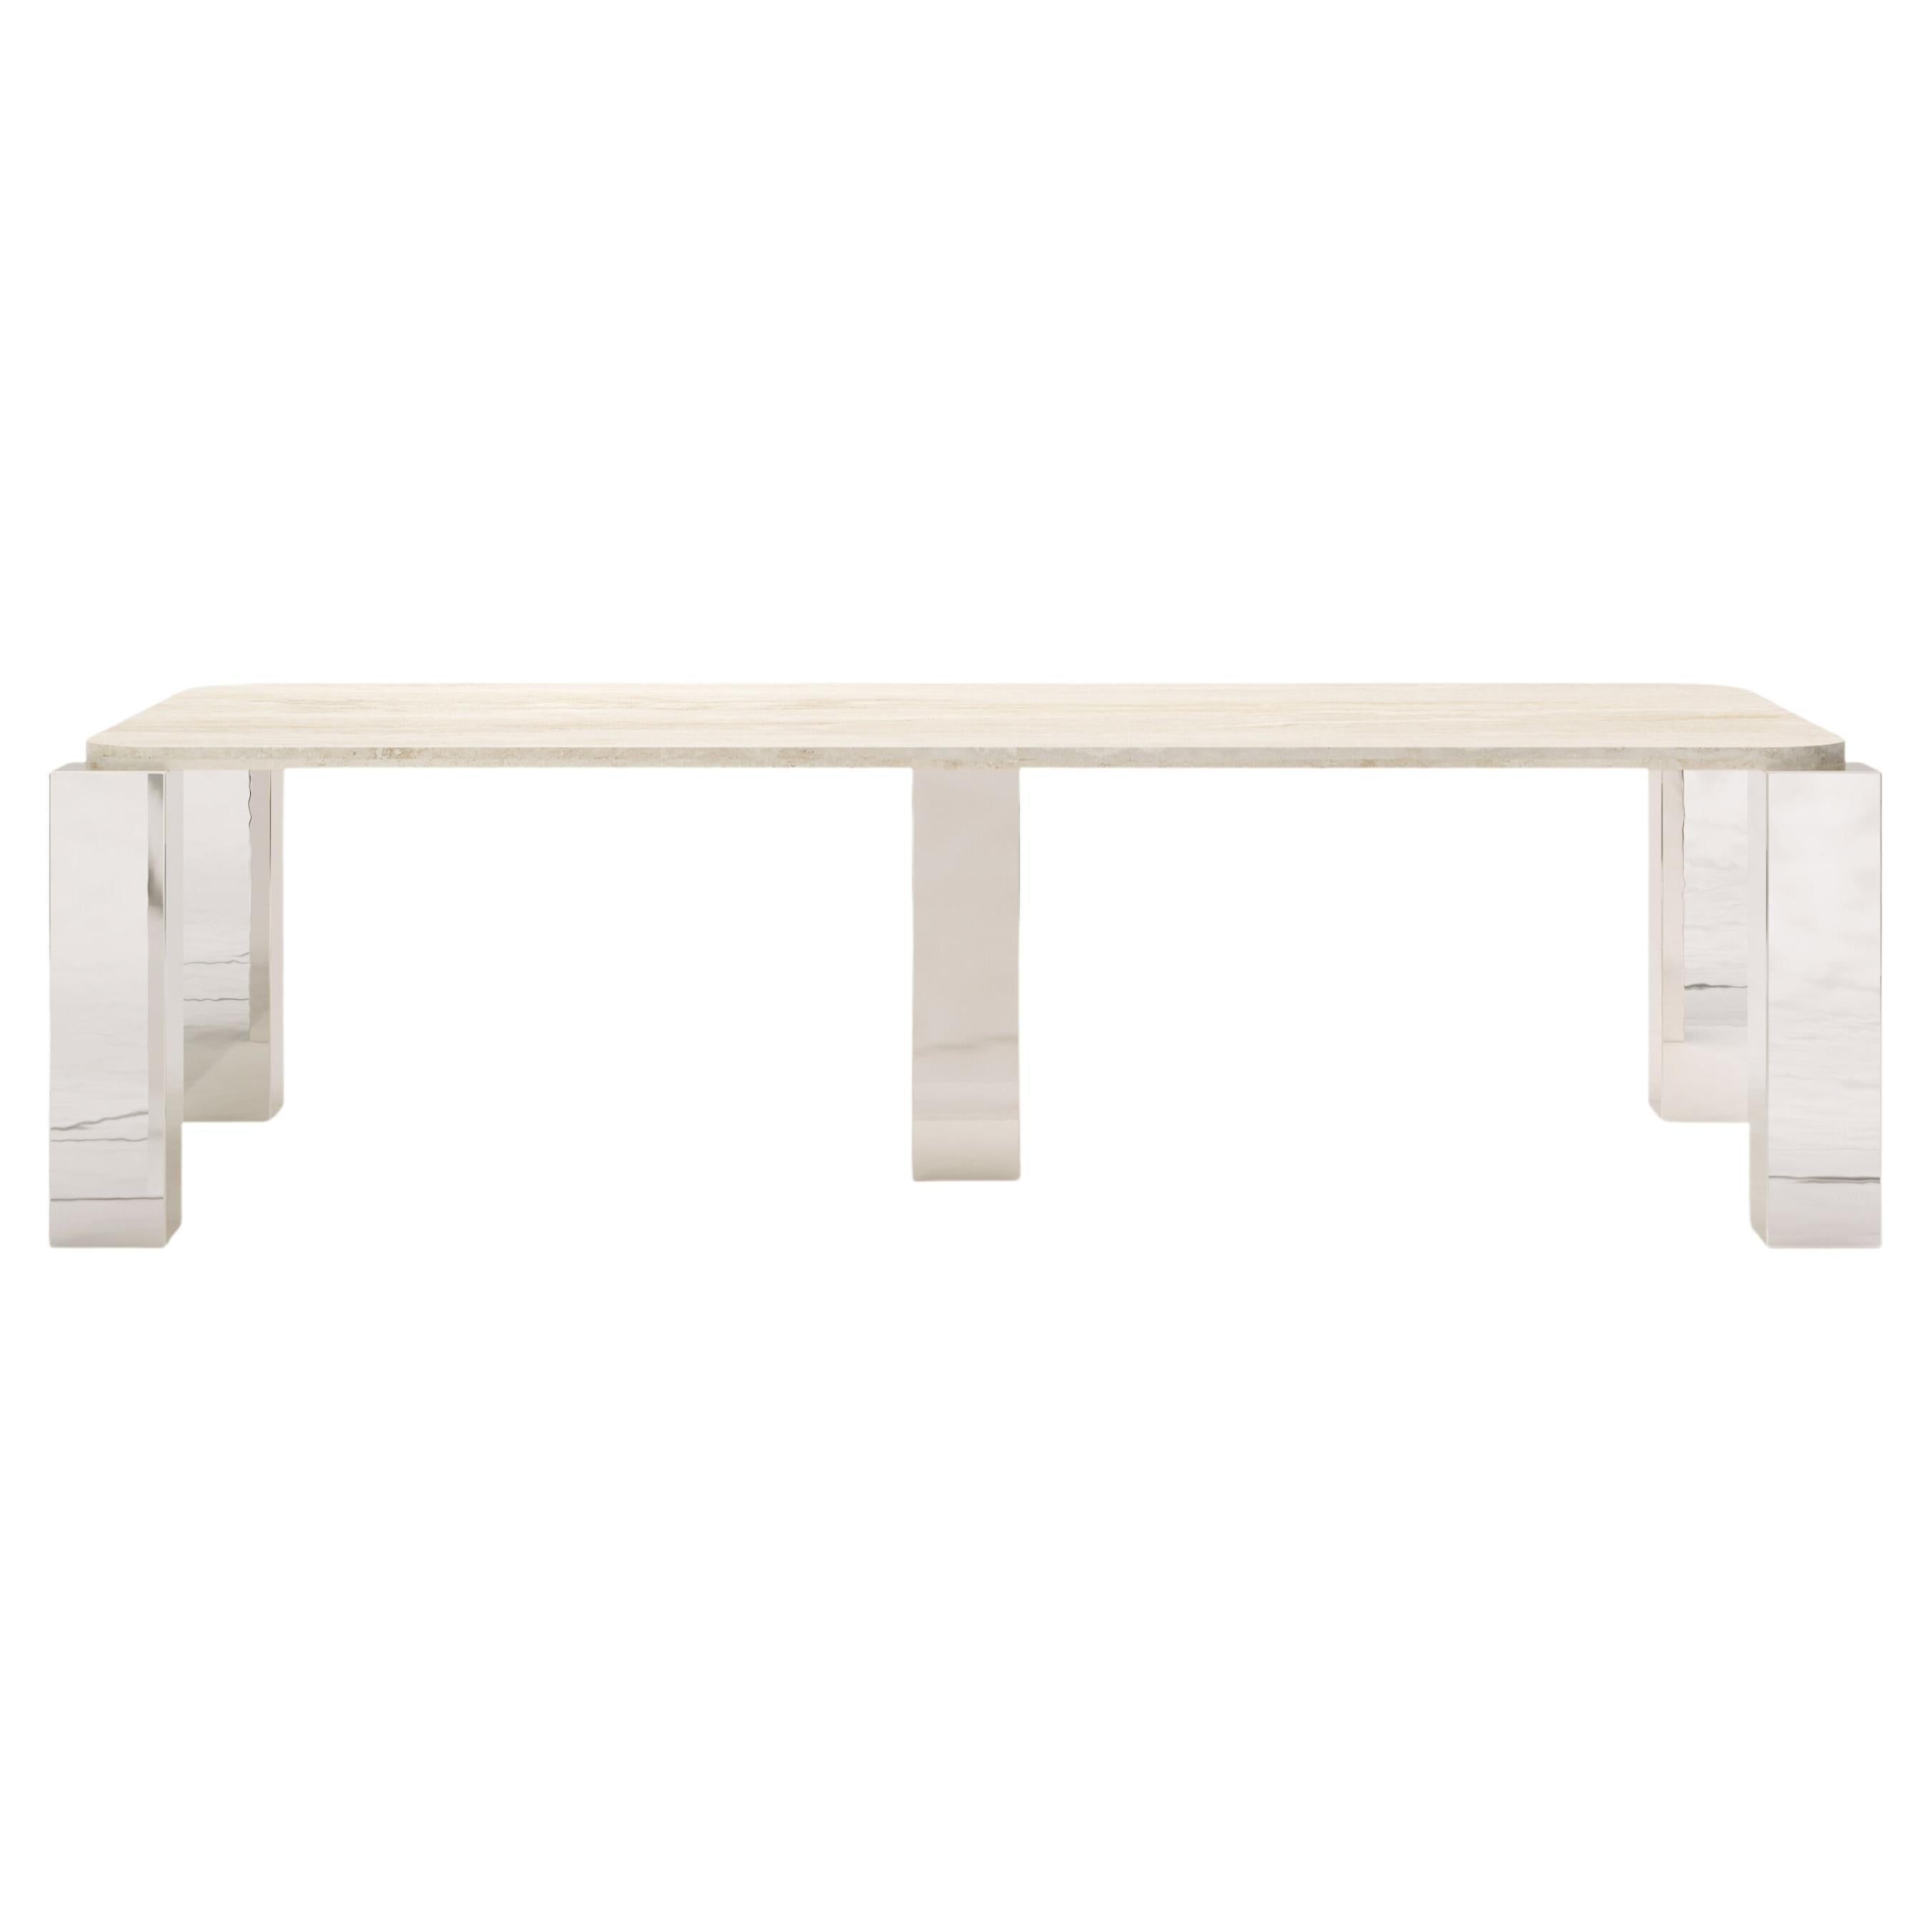 FORM(LA) Cubo Rectangle Dining Table 98”L x 44”W x 30”H Travertino & Chrome For Sale